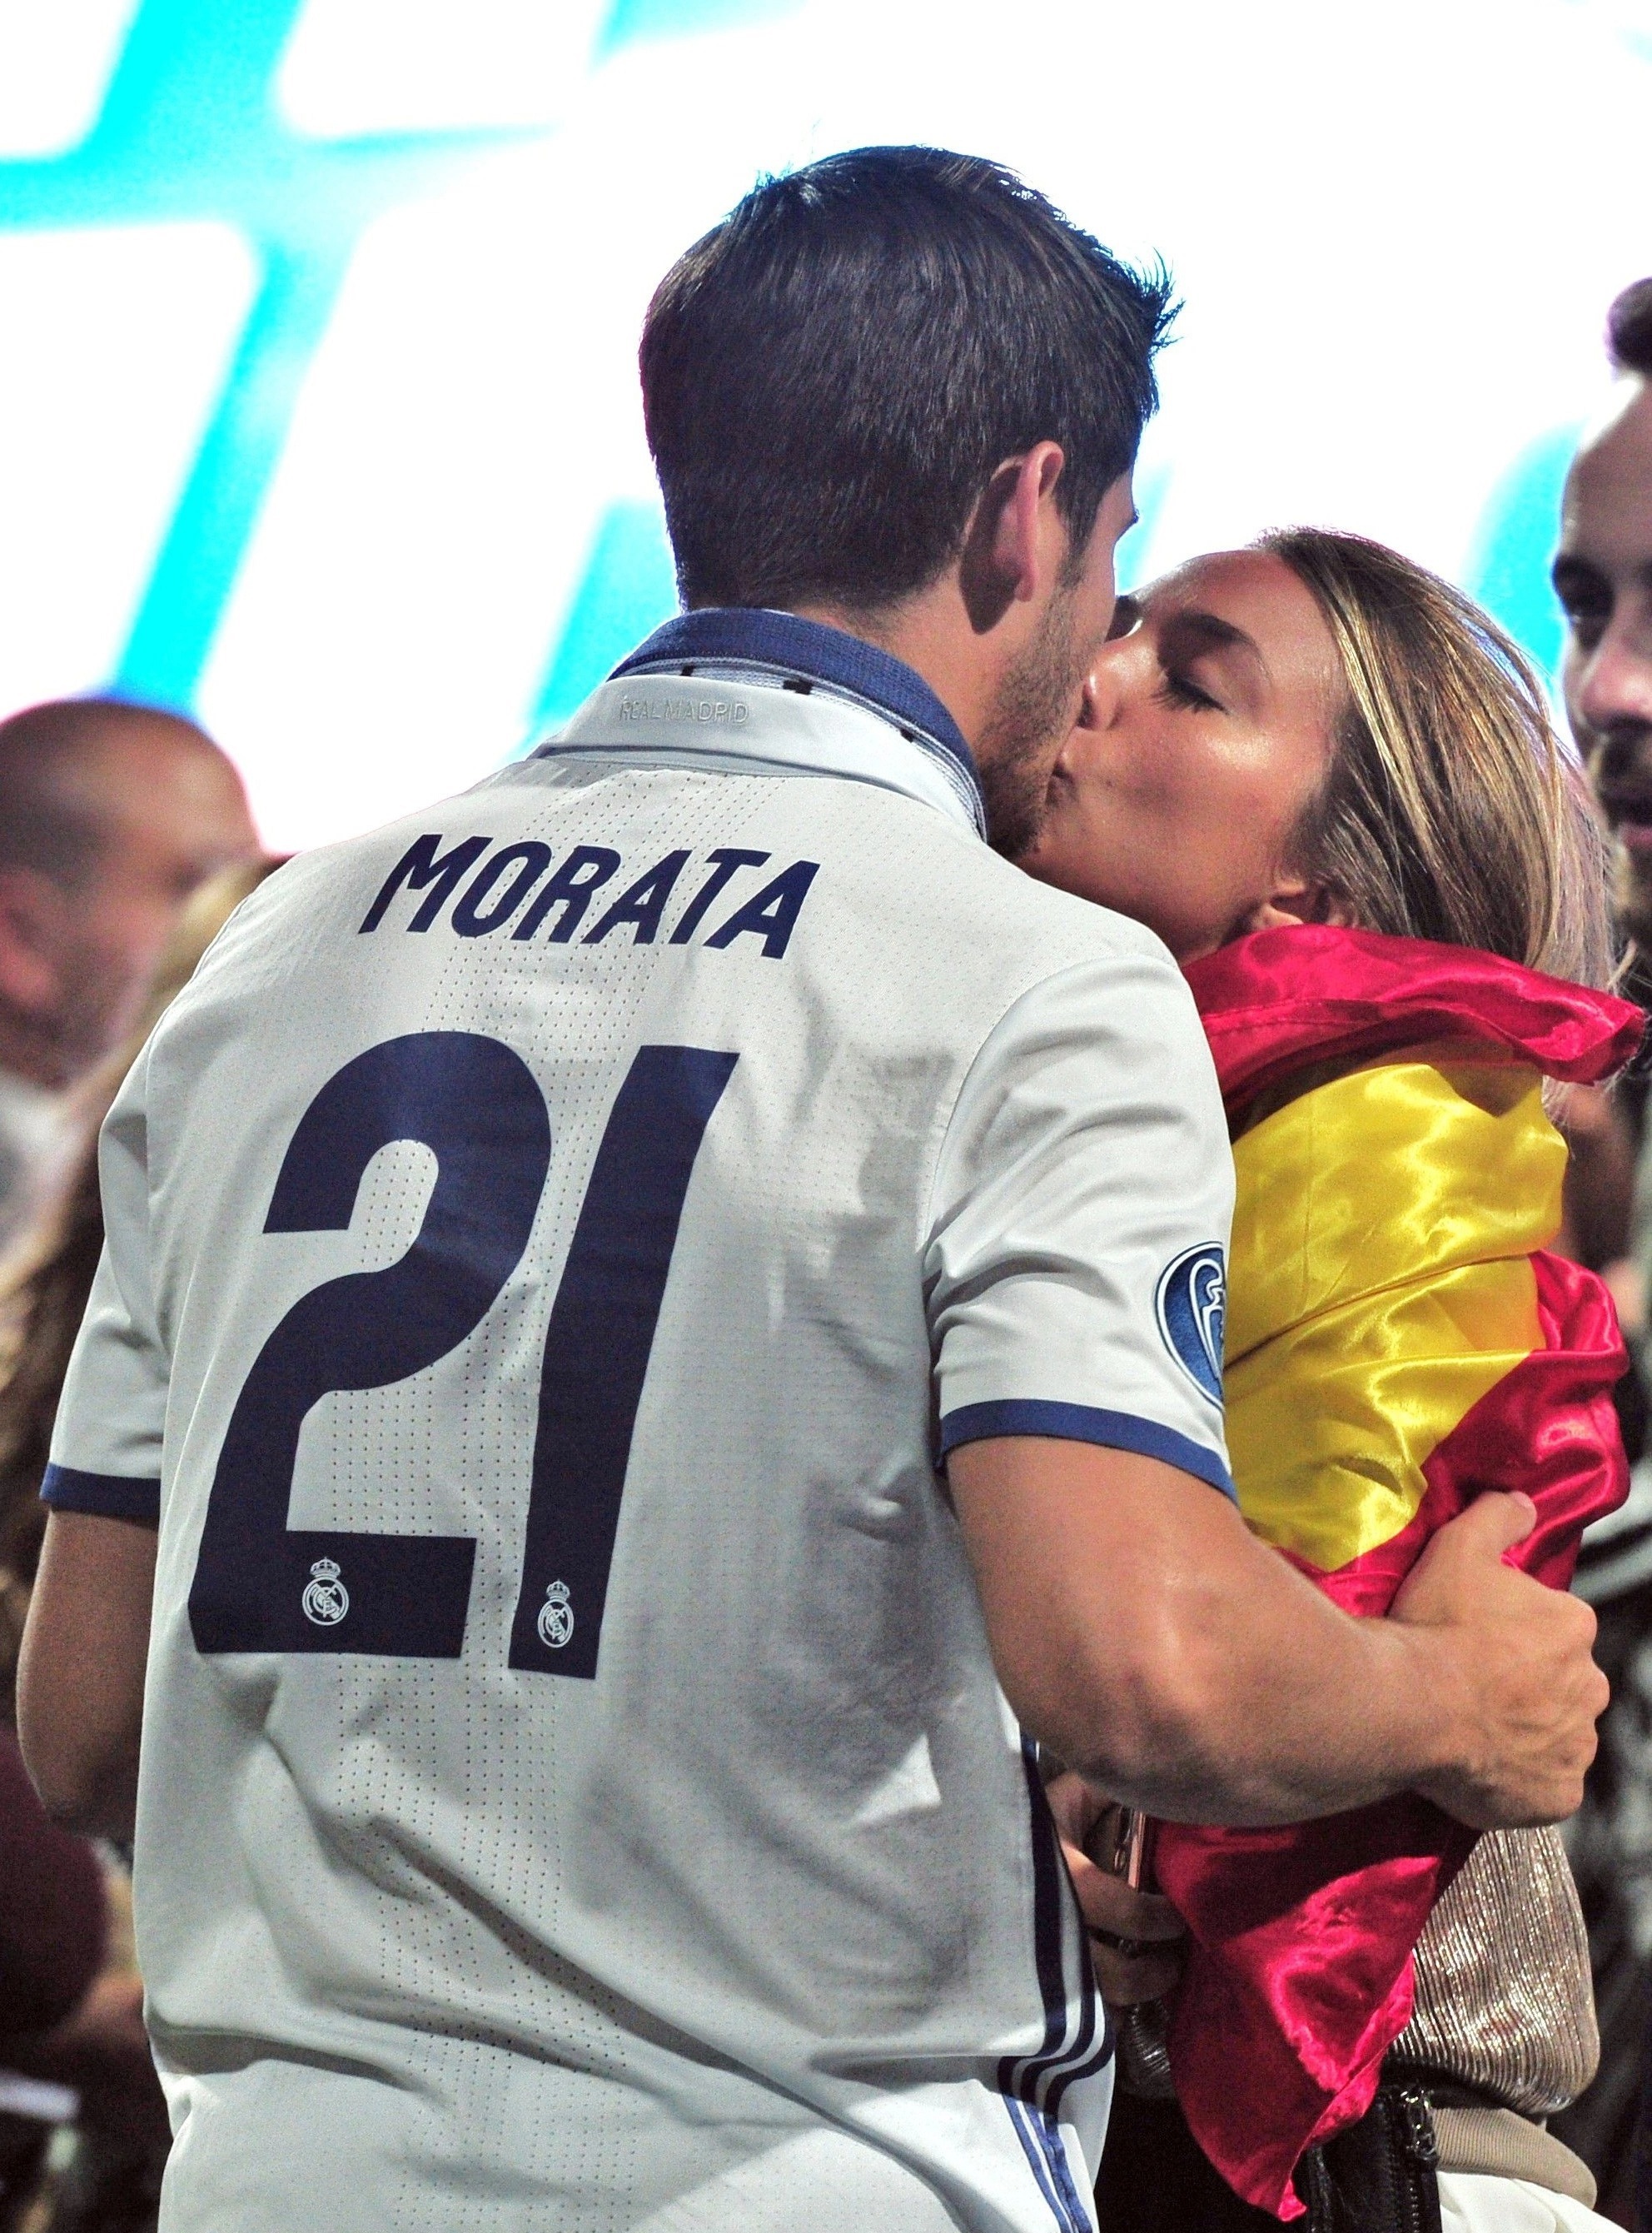 , Ex-Chelsea star Morata’s wife in intensive care after suffering ‘complications’ giving birth to their fourth child